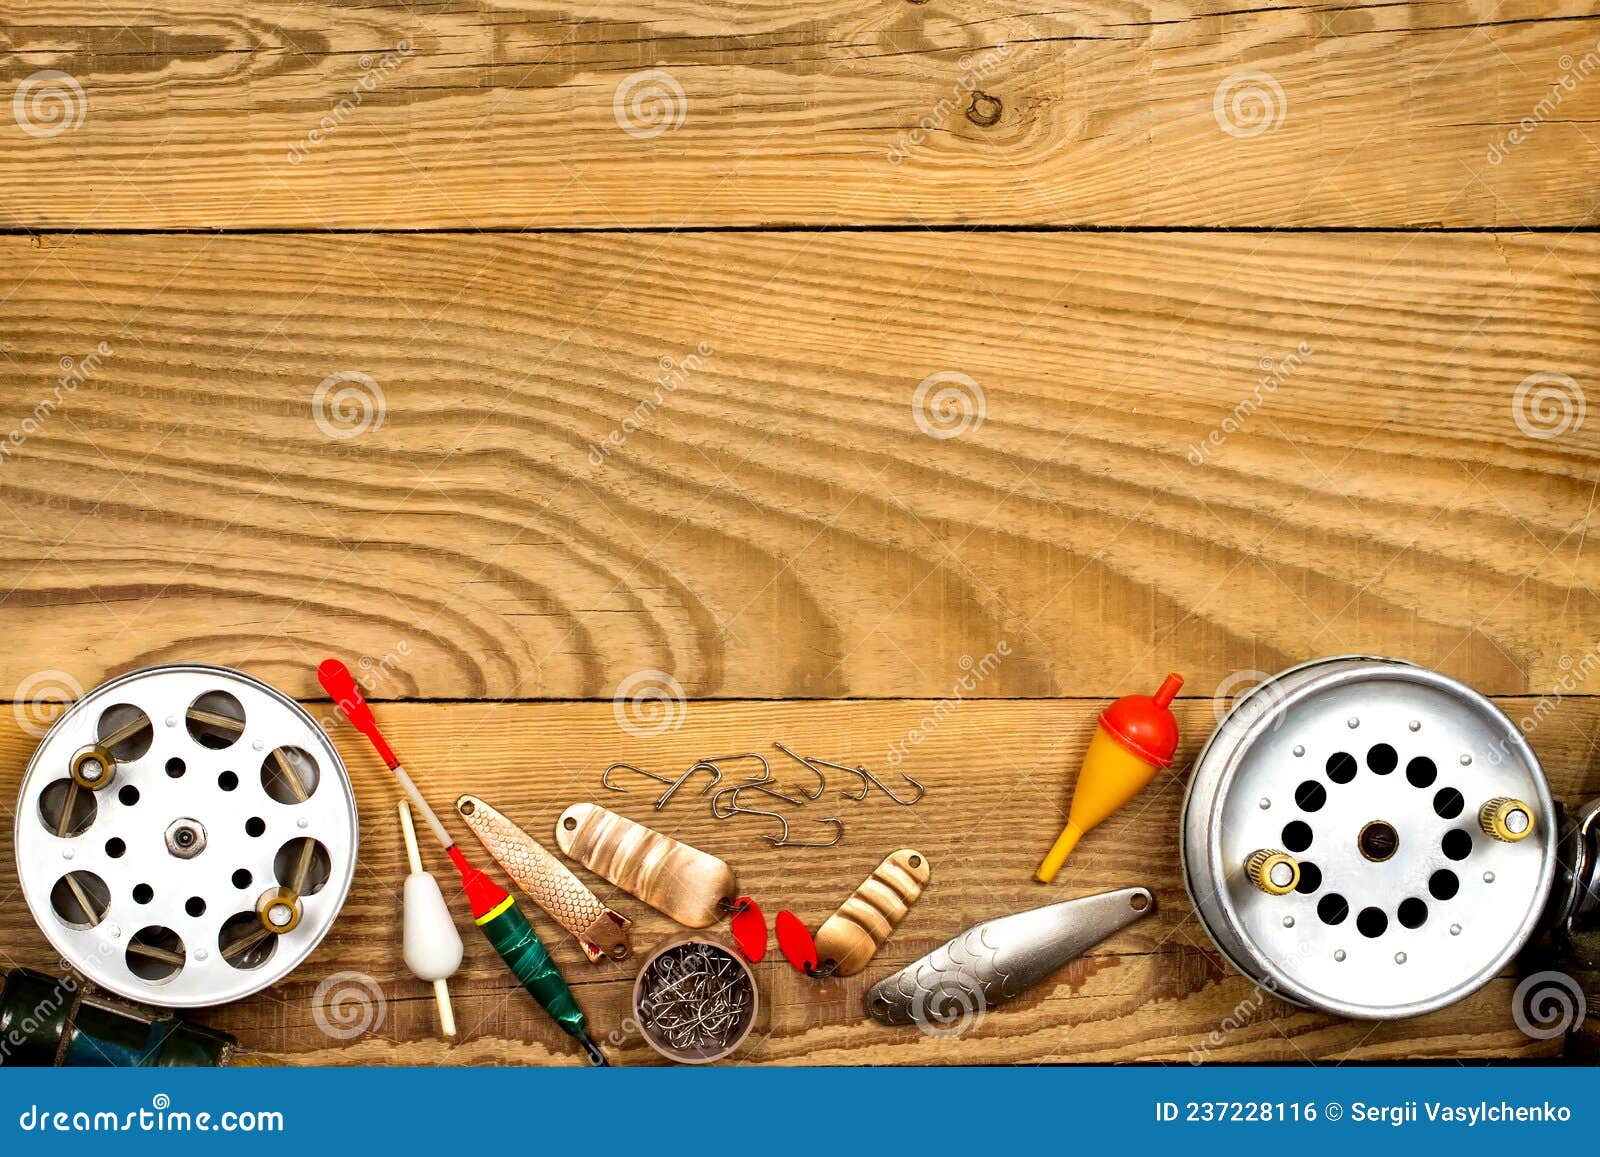 https://thumbs.dreamstime.com/z/composition-fishing-tackle-accessories-wood-background-image-theme-tourism-outdoor-activities-237228116.jpg